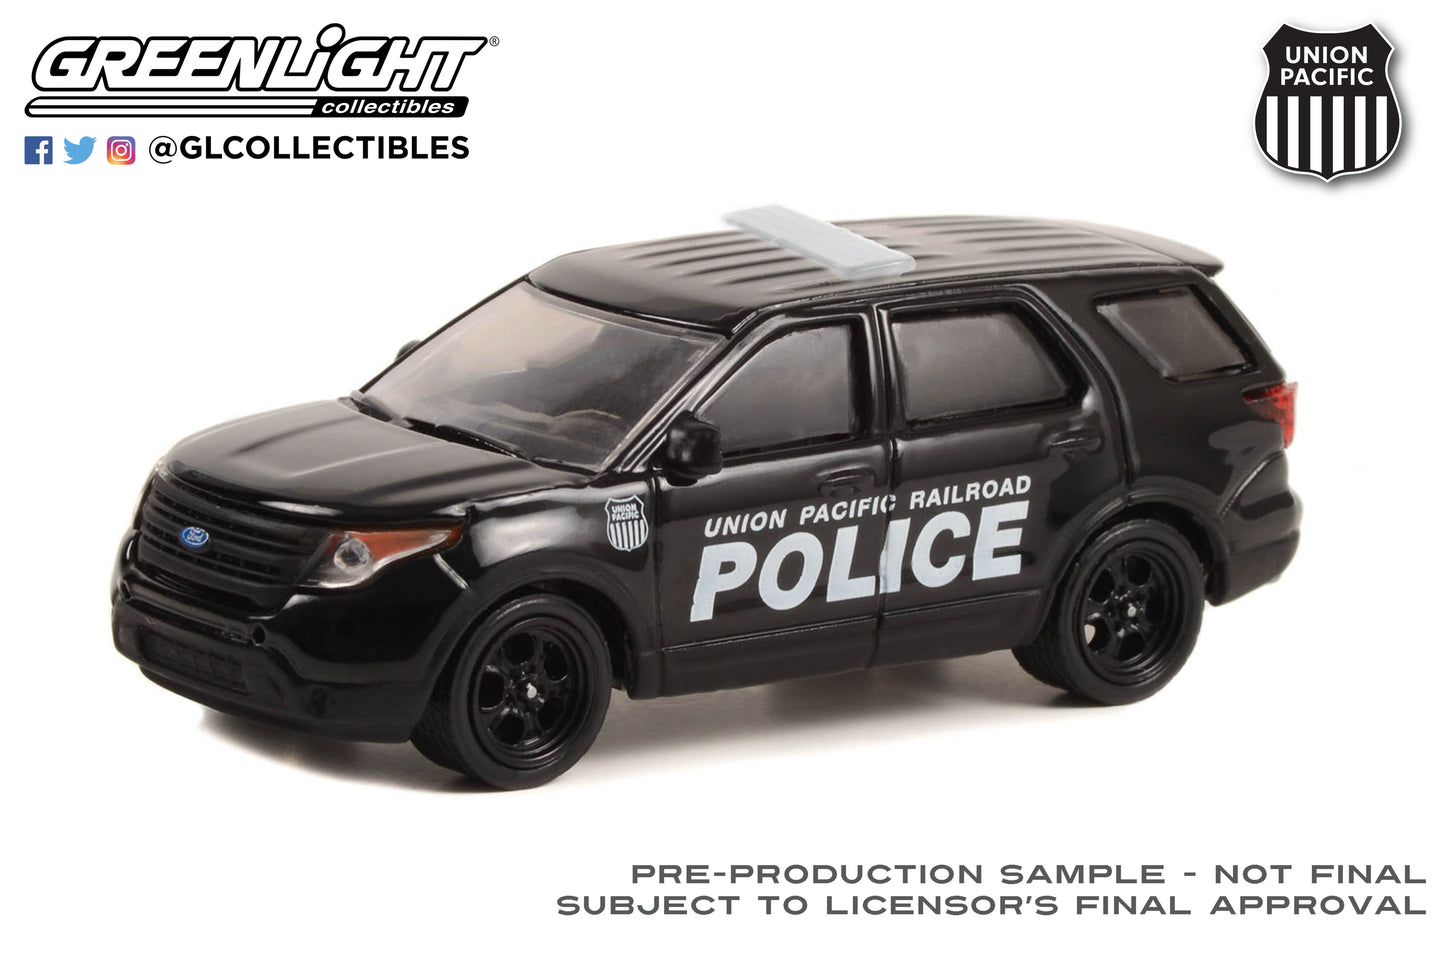 GreenLight 1:64 2015 Ford Police Interceptor Utility - Union Pacific Railroad Police (Hobby Exclusive) 30386